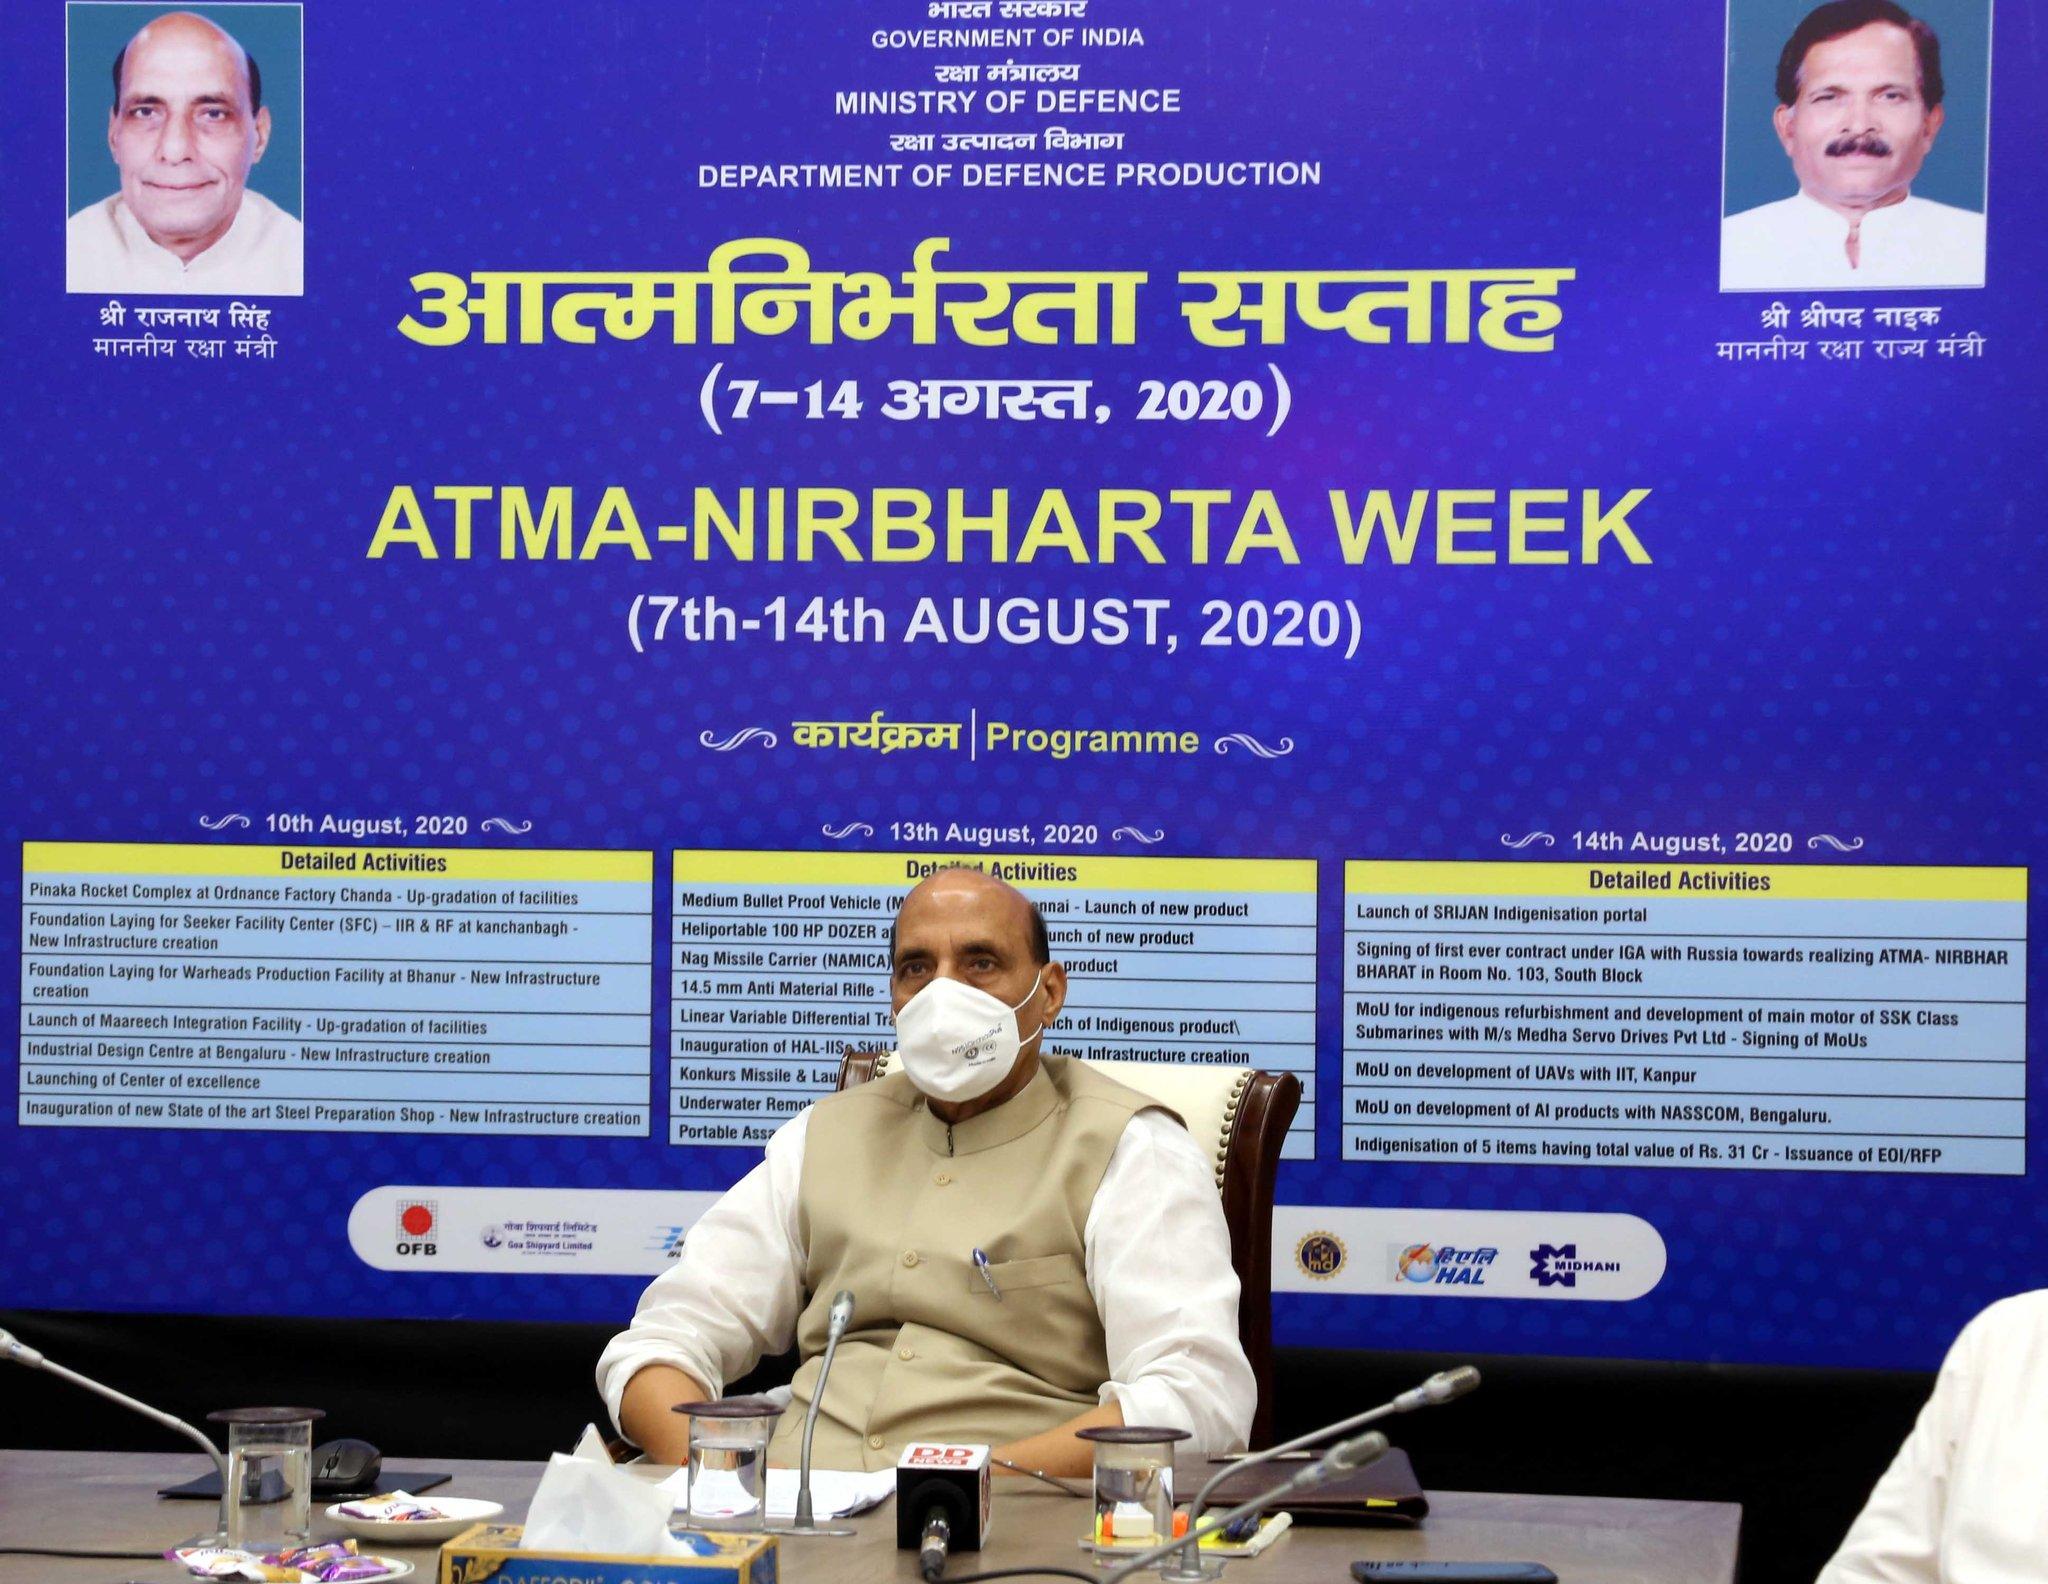 Atmanirbhar Week: Rajnath Singh launches initiatives for modernization and upgradation of facilities